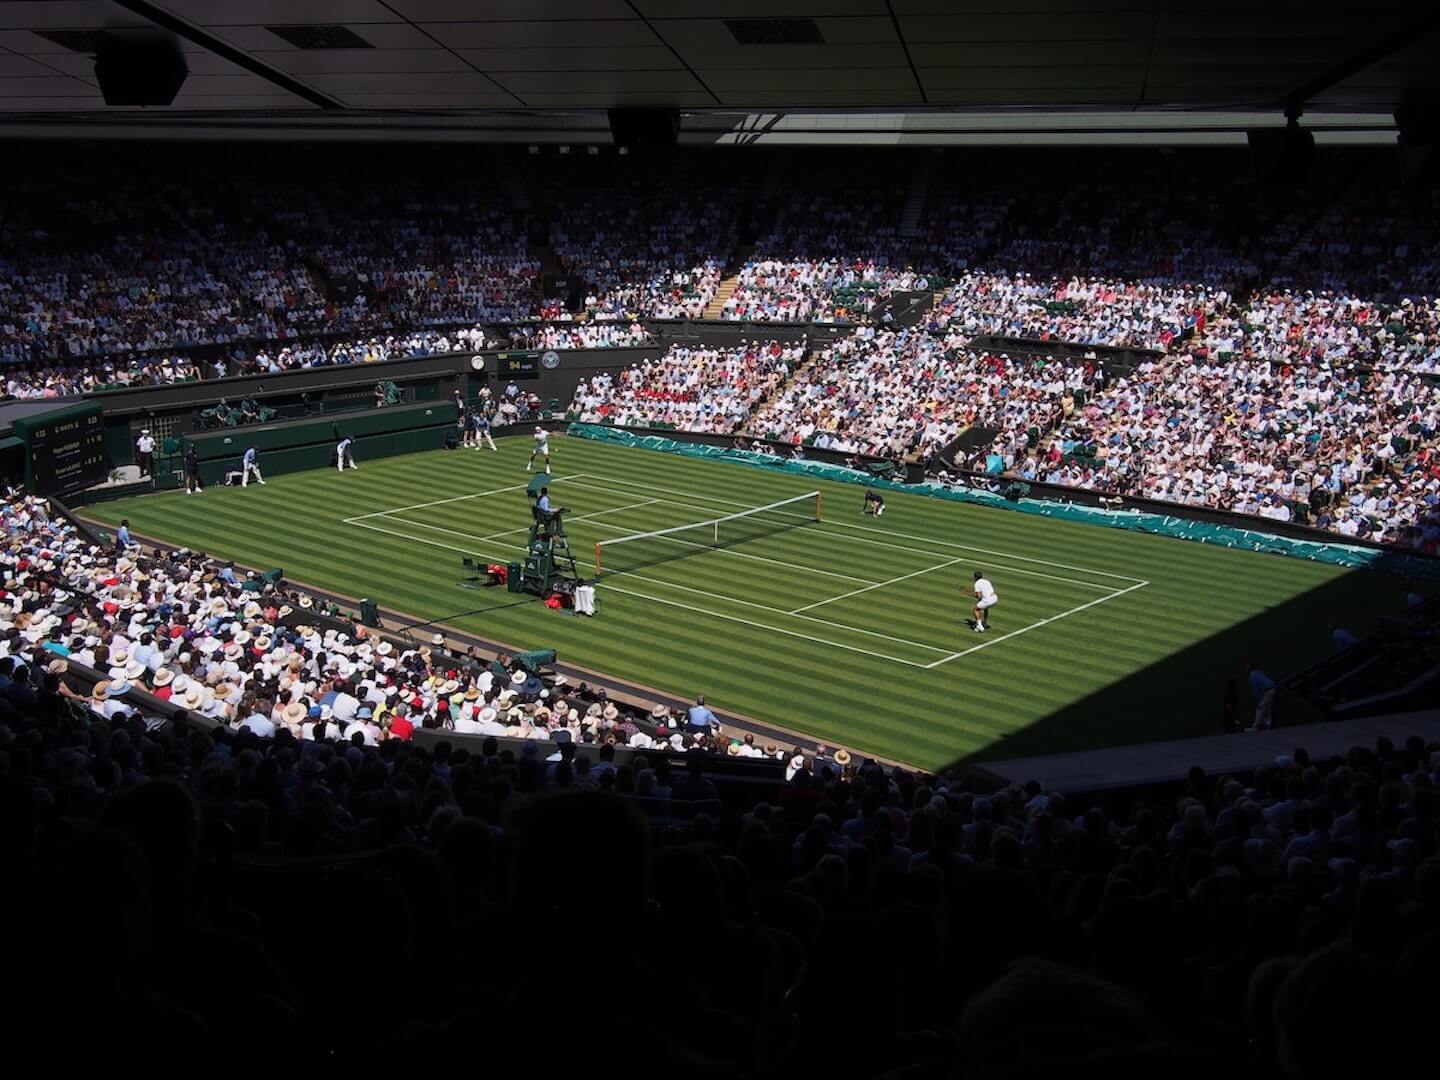 Game, Set, Match. Wimbledon season is finally here and these champion suppliers have everything you need to plan the perfect summer celebration. From gin & Pimms bars to graze boards & ice cream carts, we've got you covered.